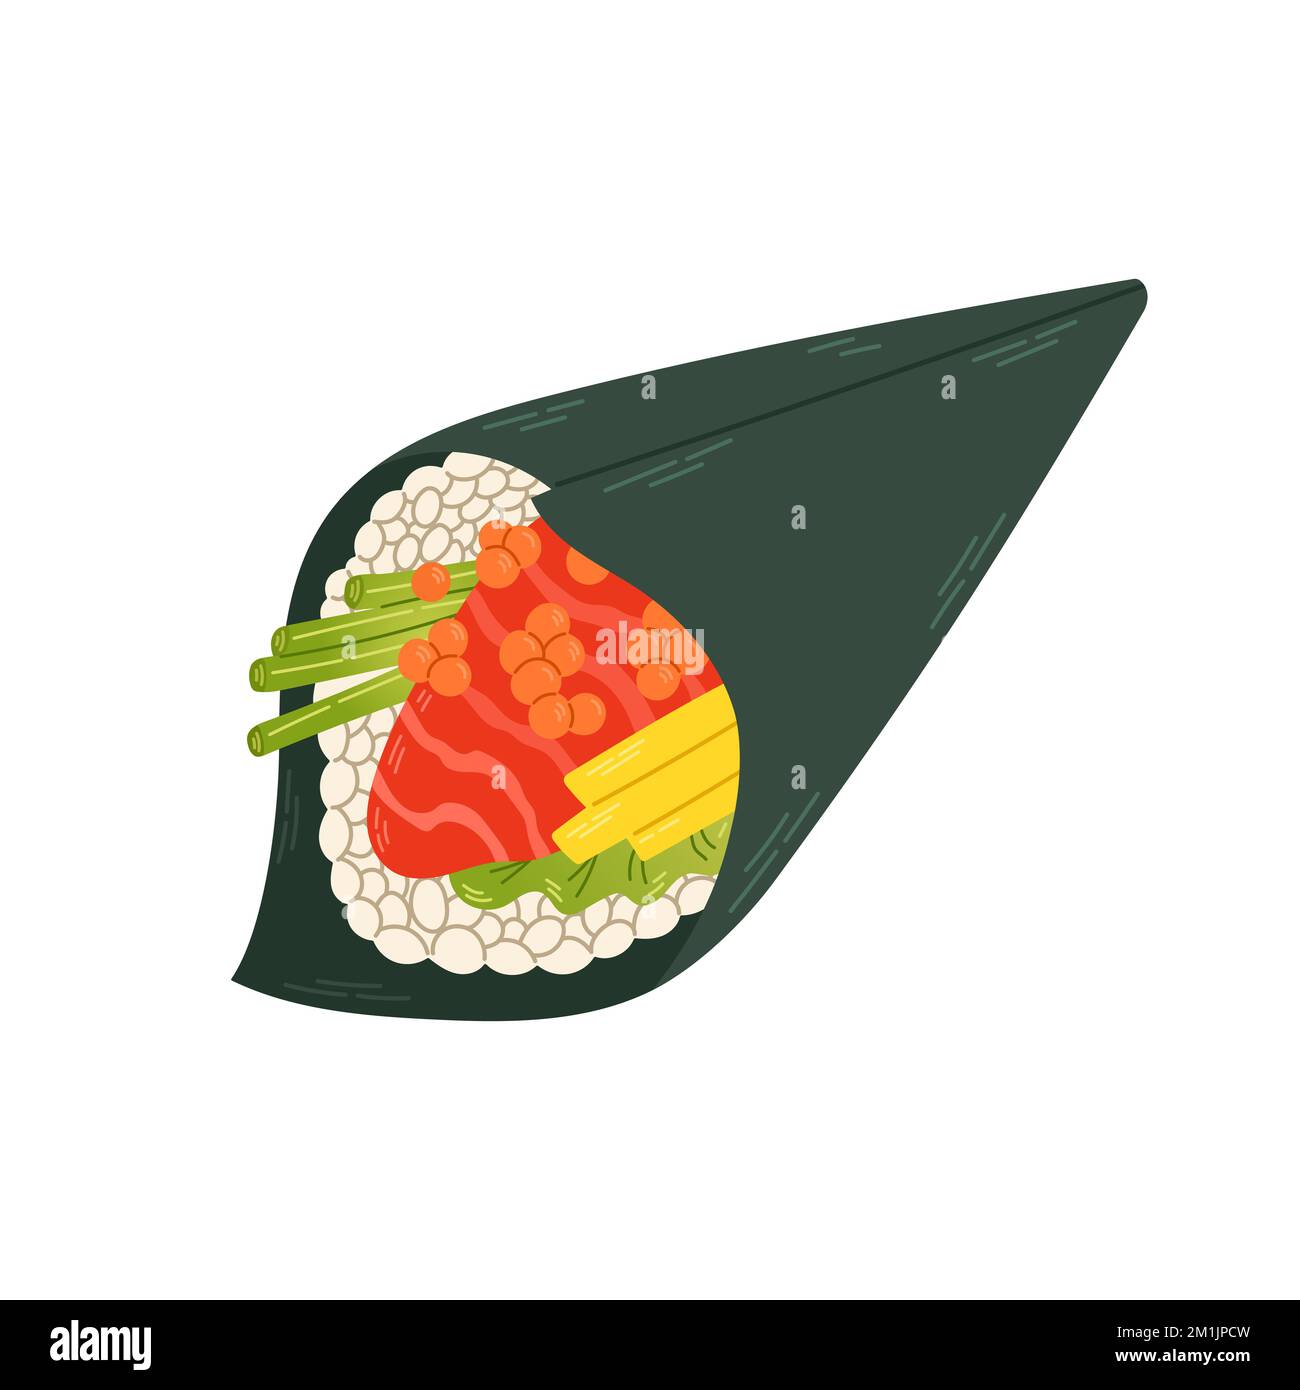 Temaki japan asian food vector logo design pack isolated on white background Stock Vector